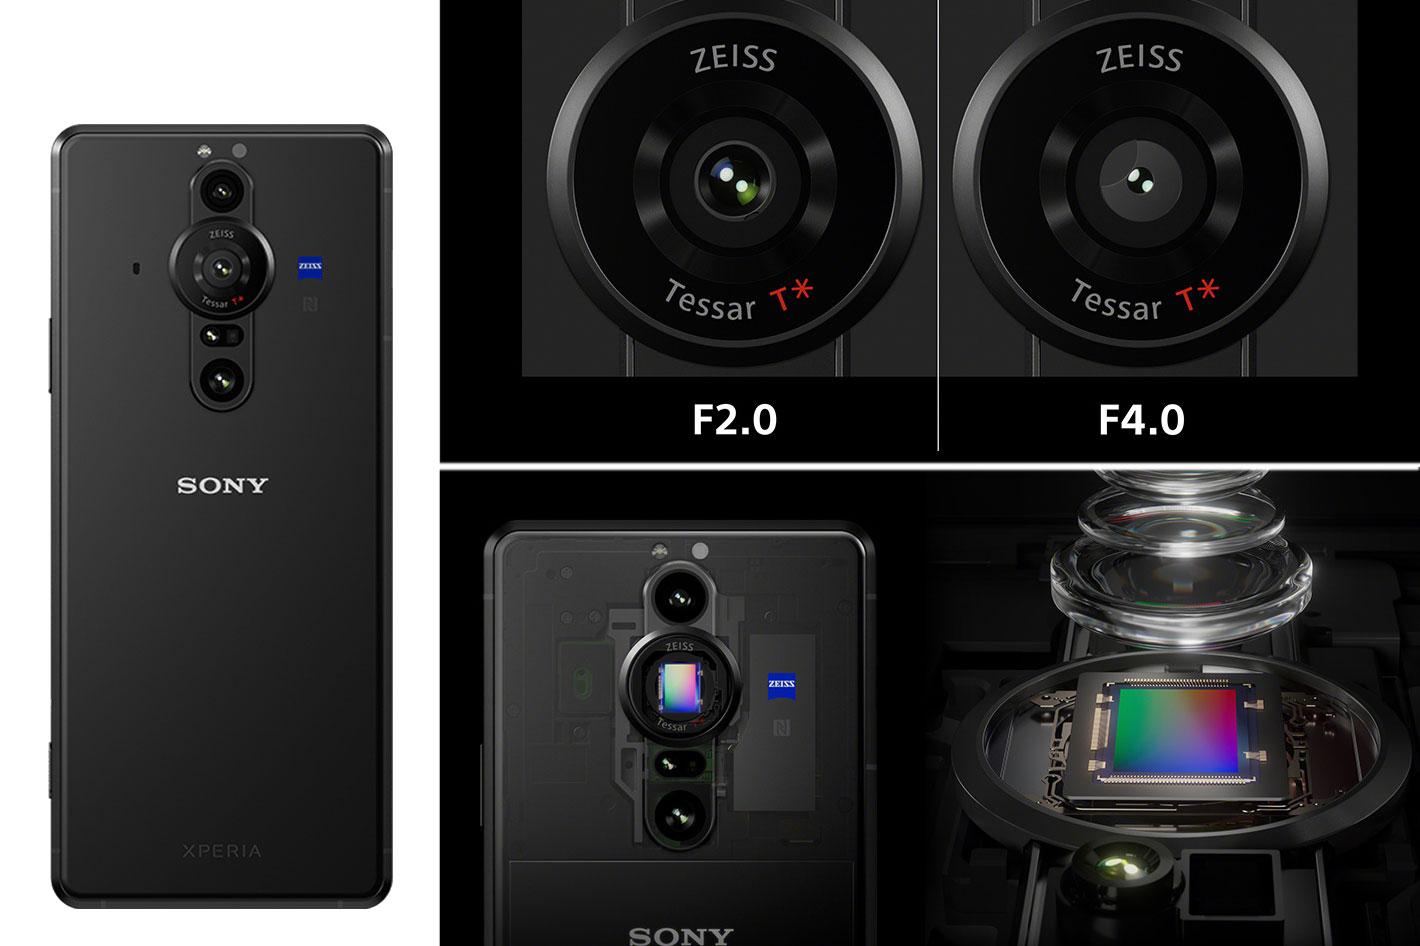 Xperia PRO-I smartphone uses sensor from Sony RX100 camera by Jose Antunes - ProVideo Coalition